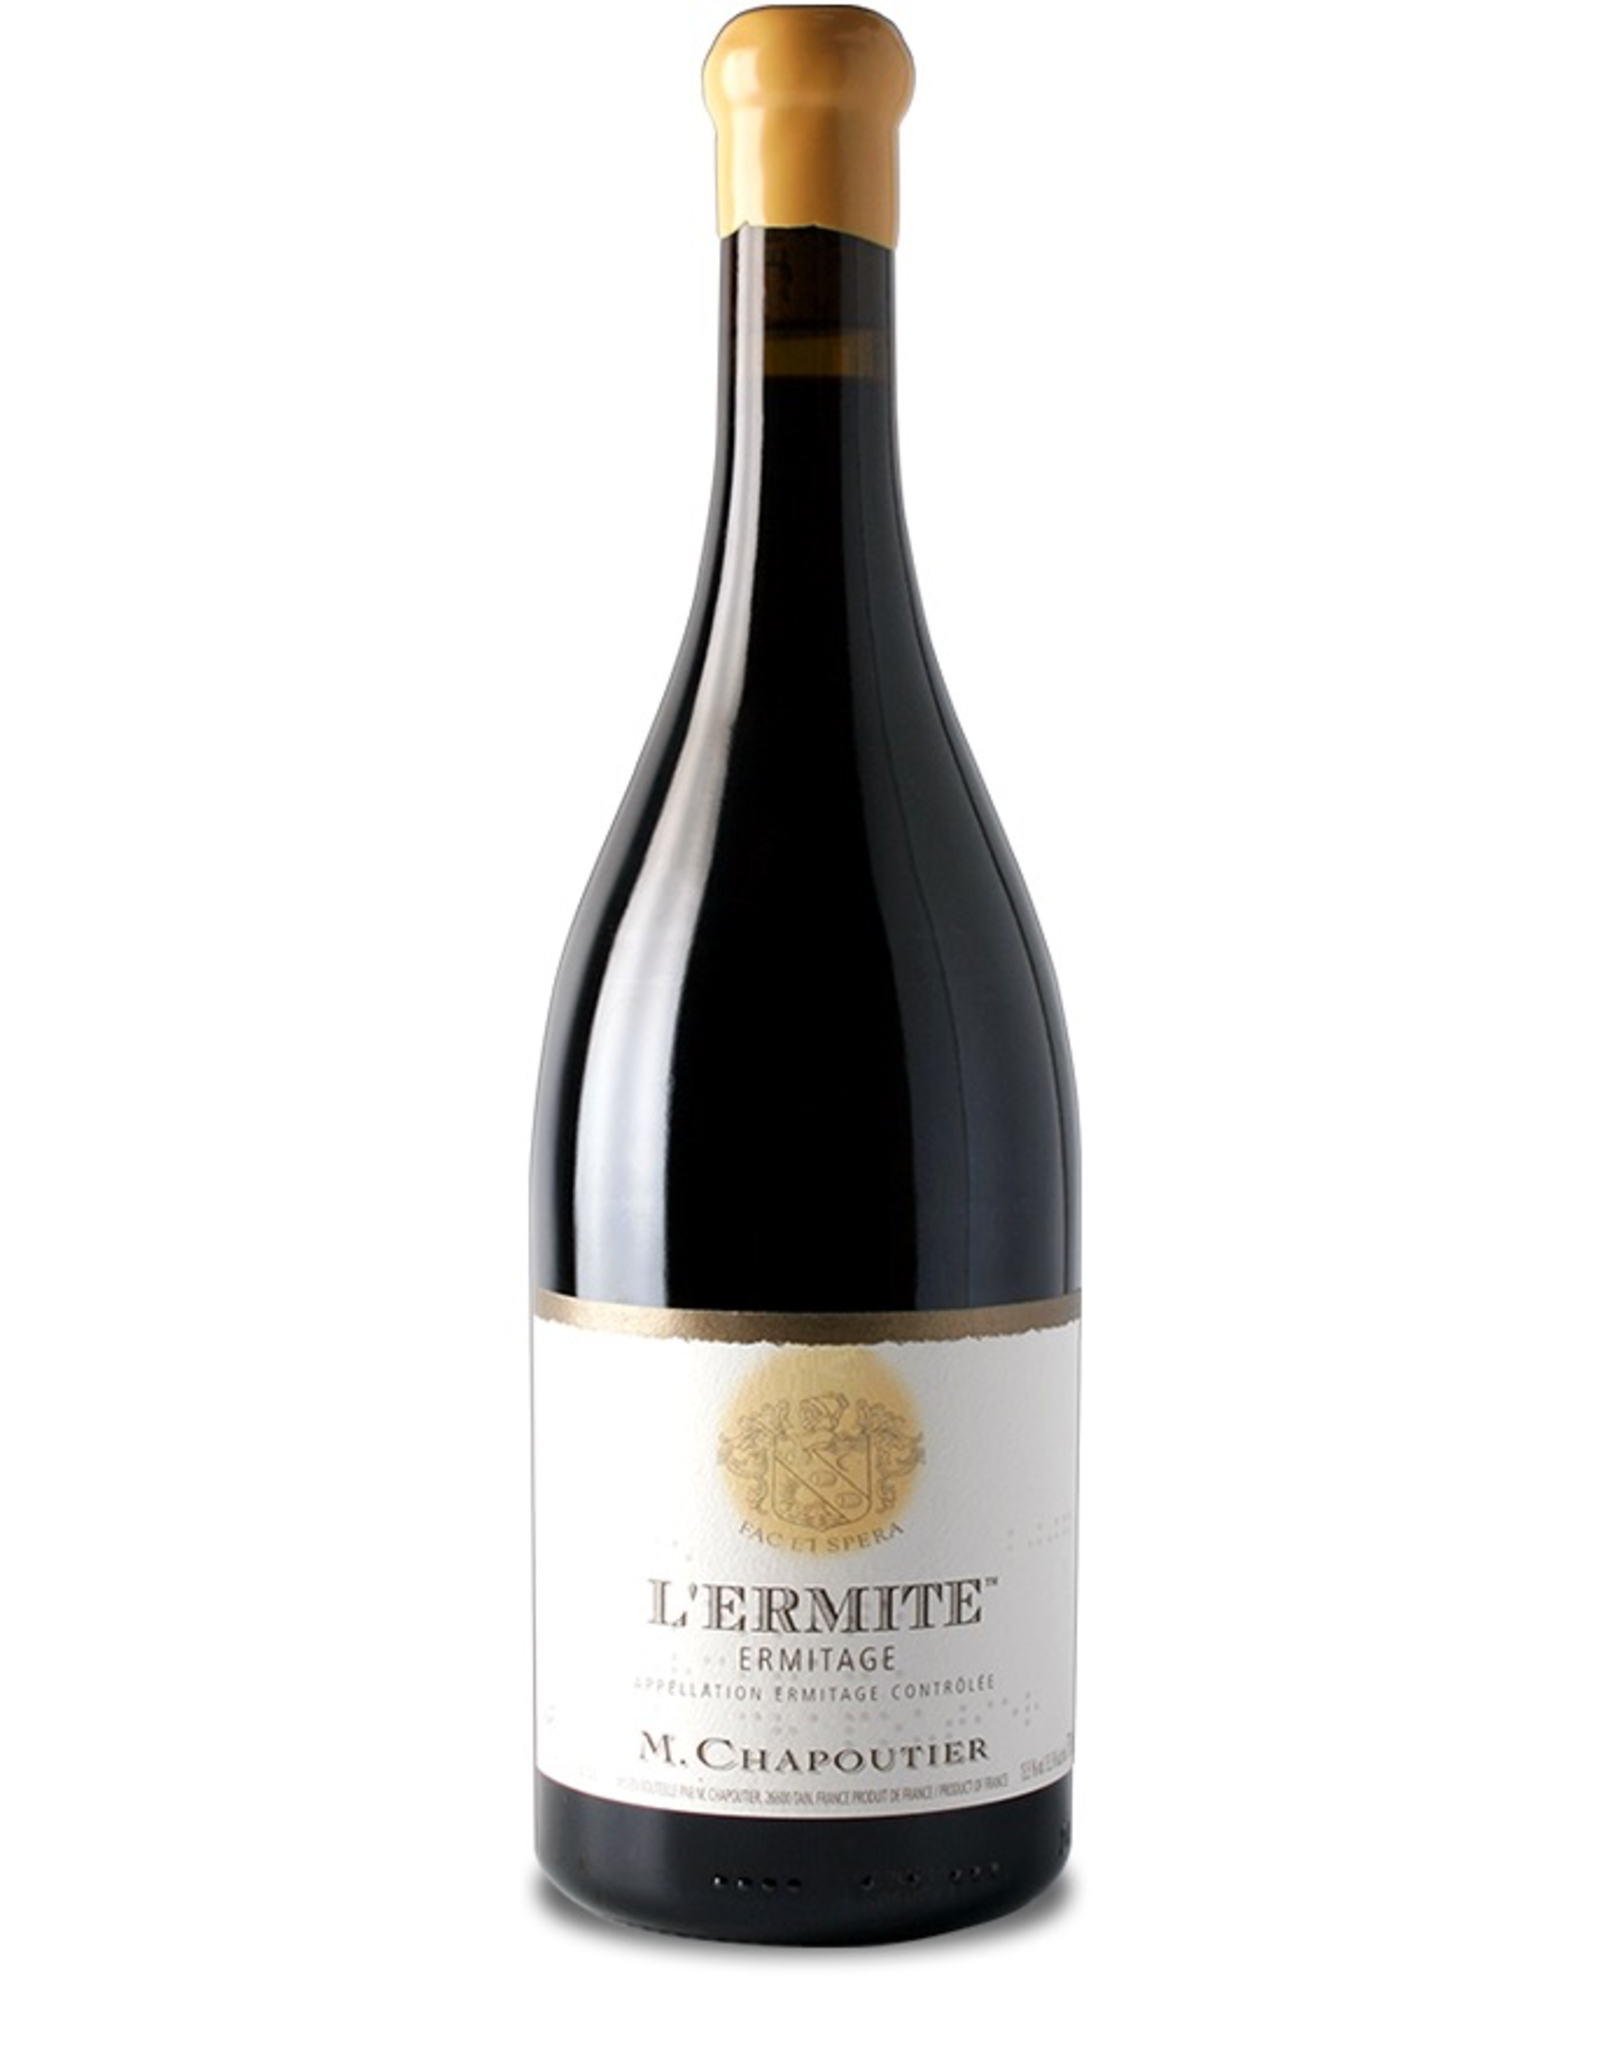 Red Wine 2016, M. Chapoutier L’Ermite Ermitage, Red Rhone Blend, Cotes du Rhone, Southern Rhone, France, 13.5% Alc, CT93.6 JD100 RP98